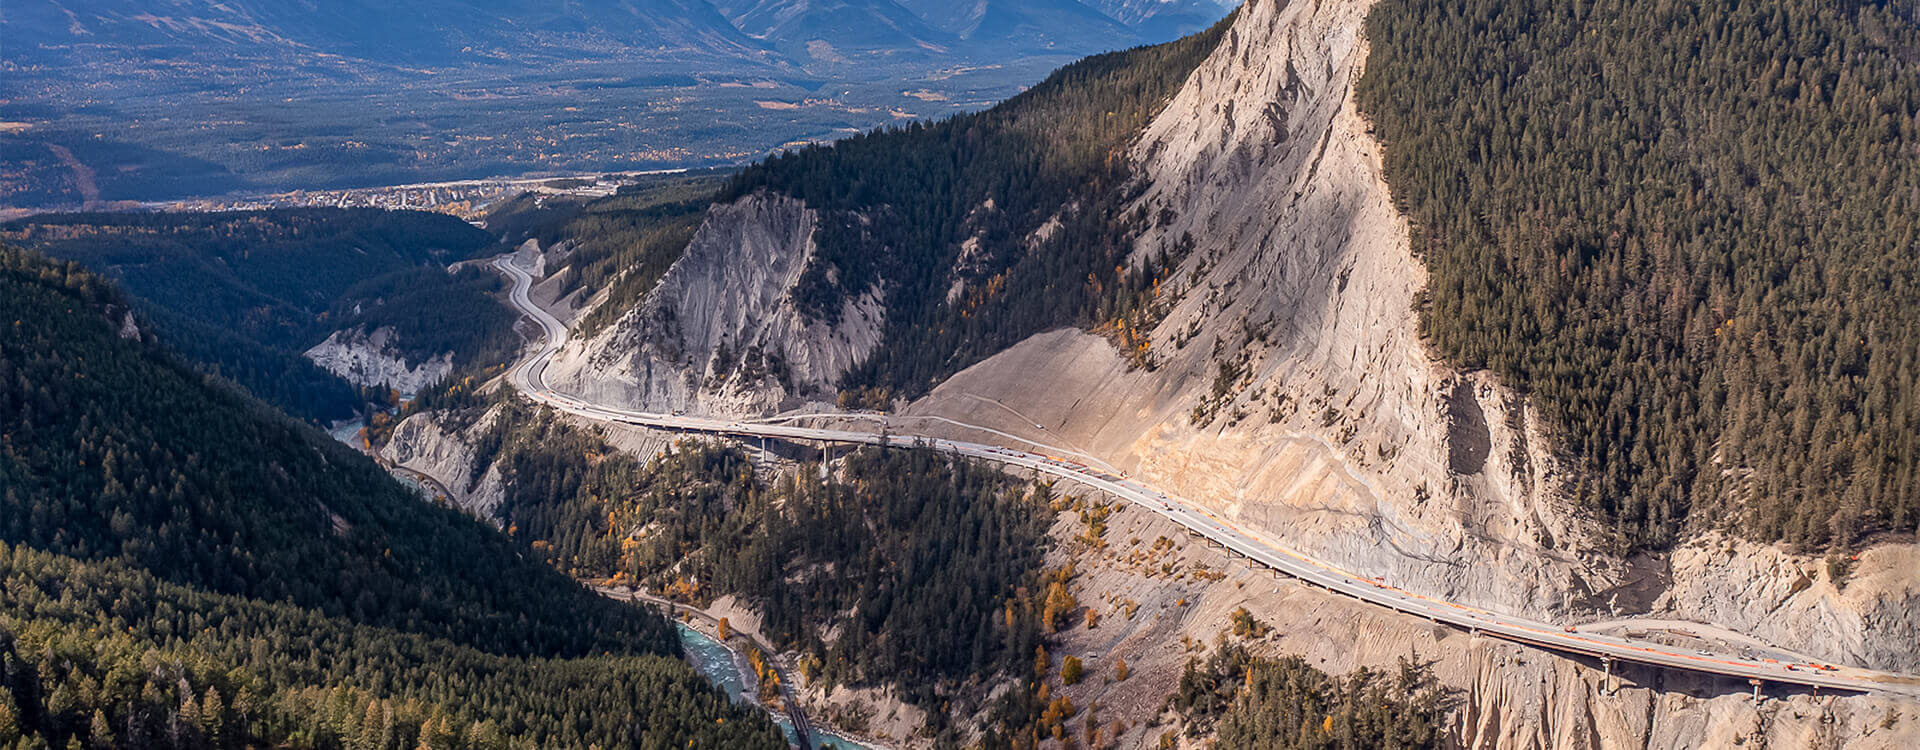 bnr-Kicking Horse Canyon-Owners Engineer